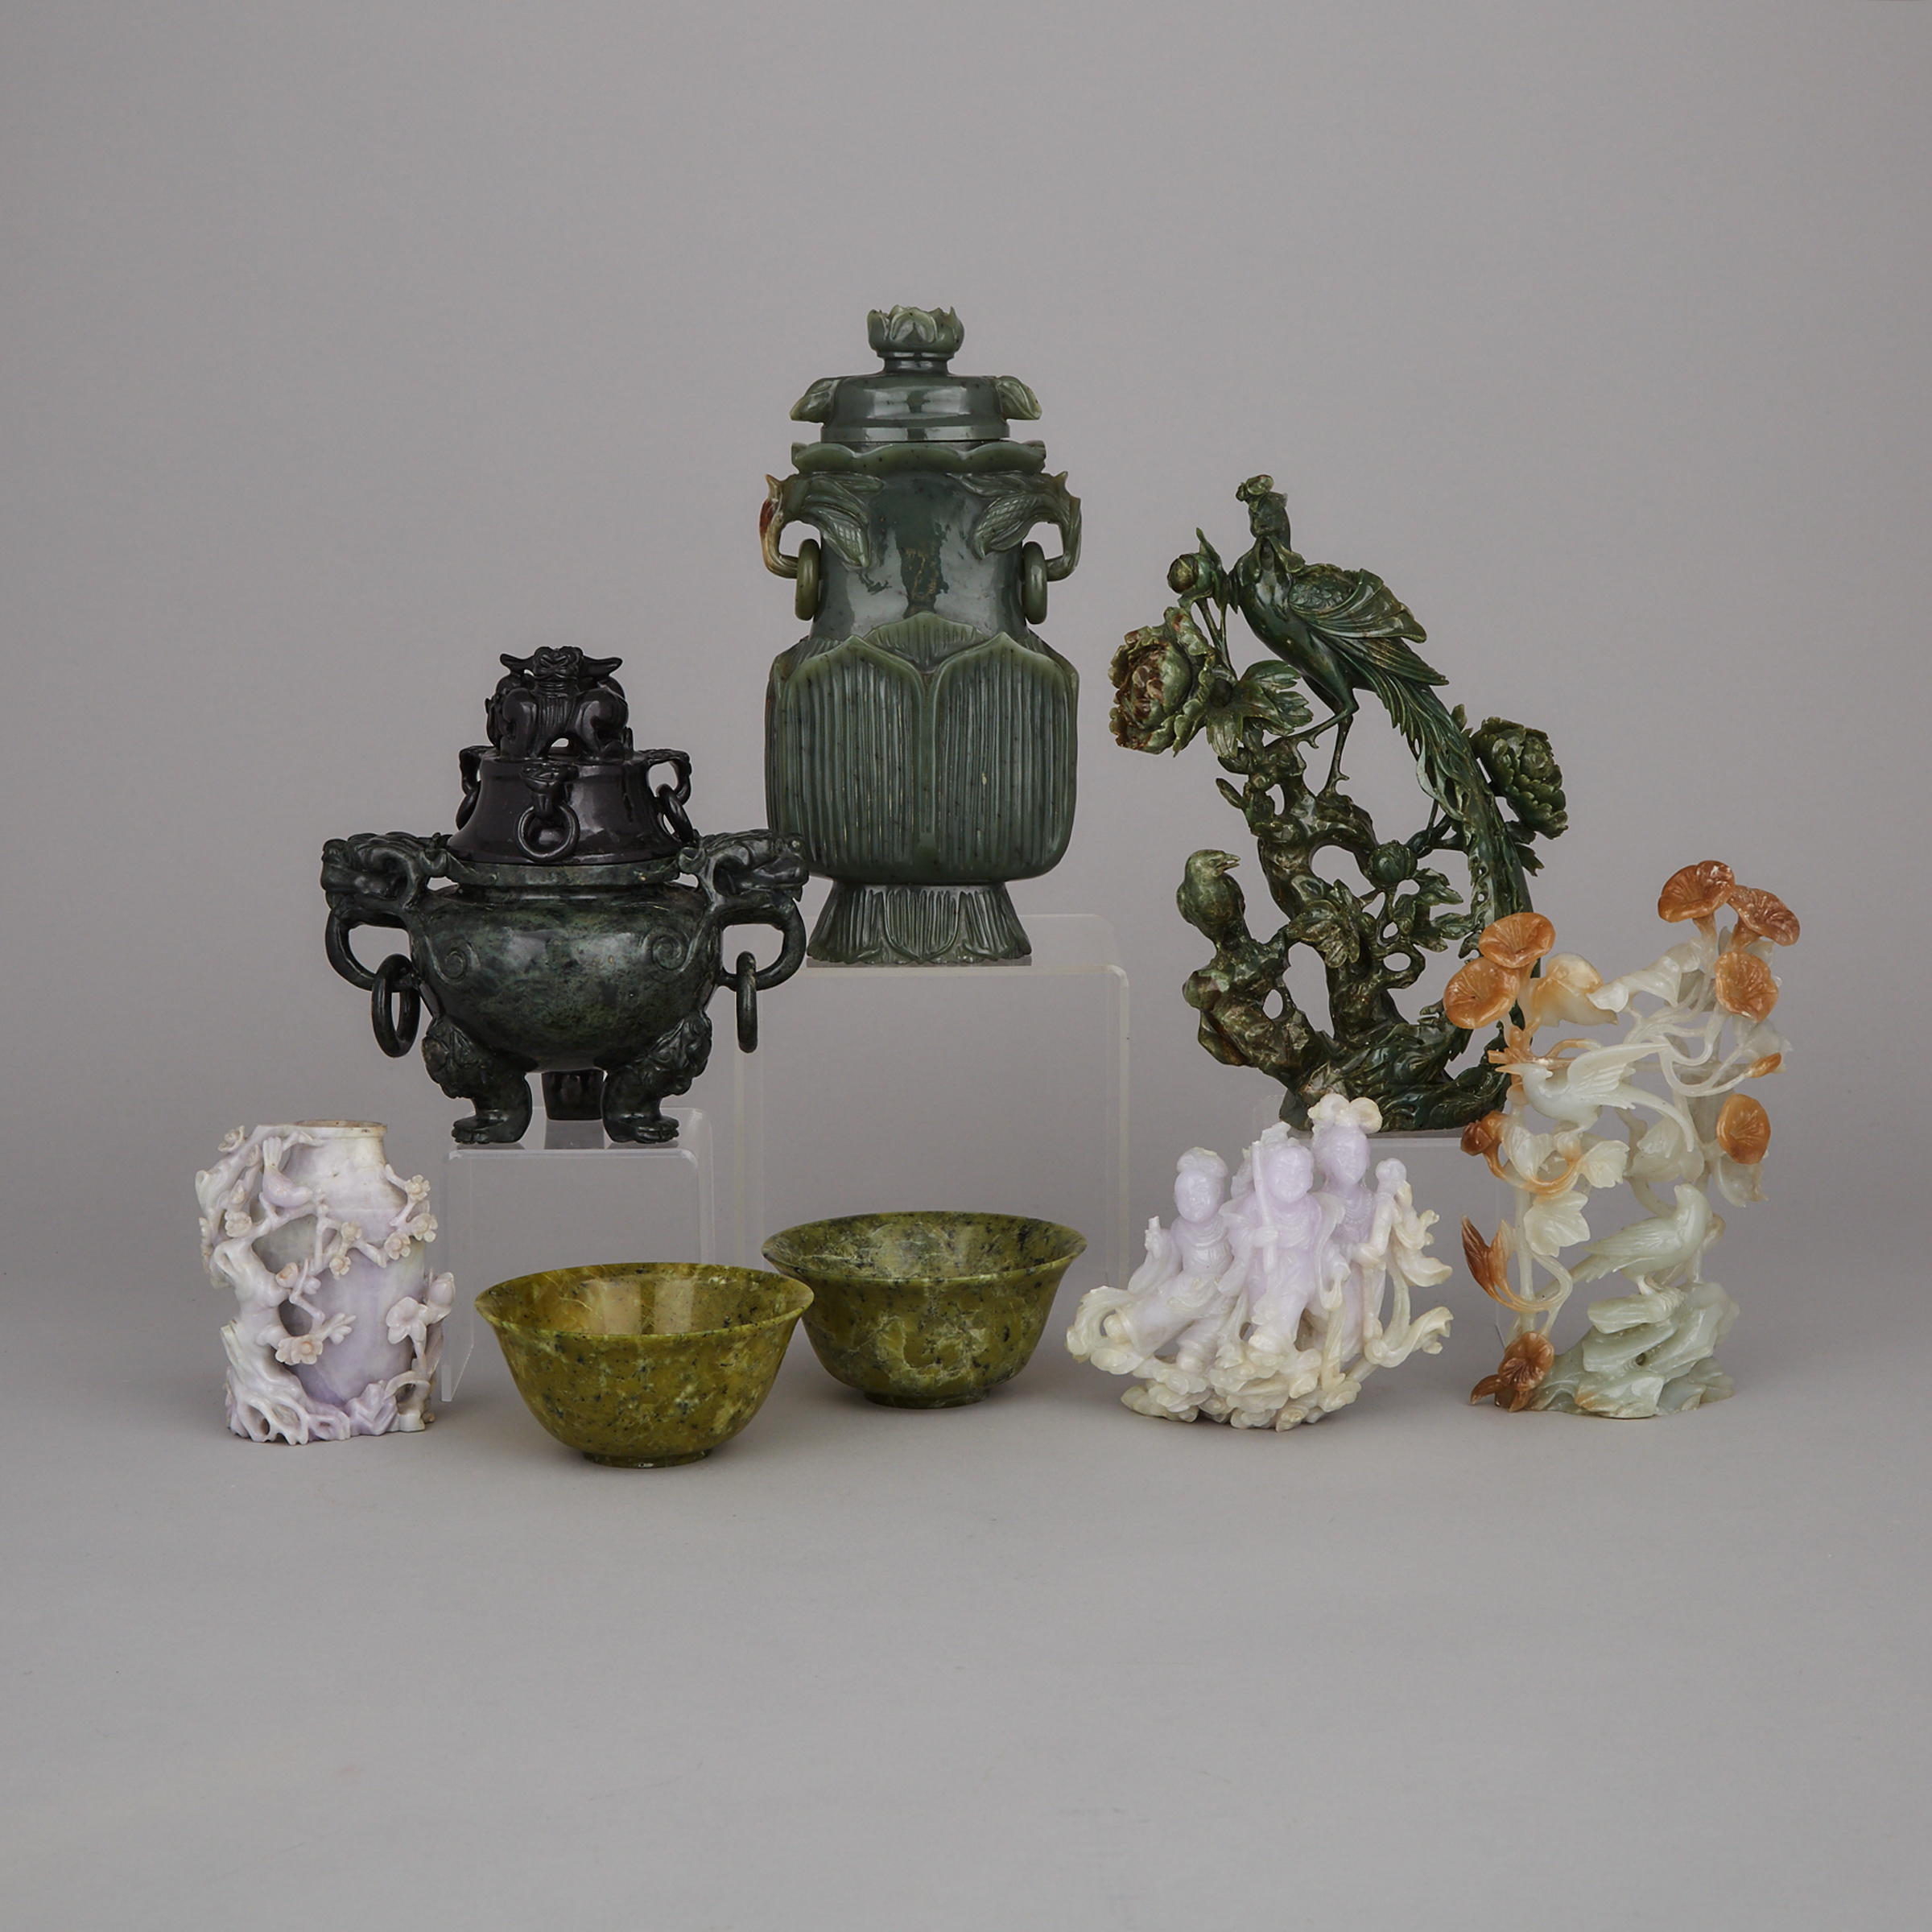 A Group of Eight Chinese Hardstone Carvings